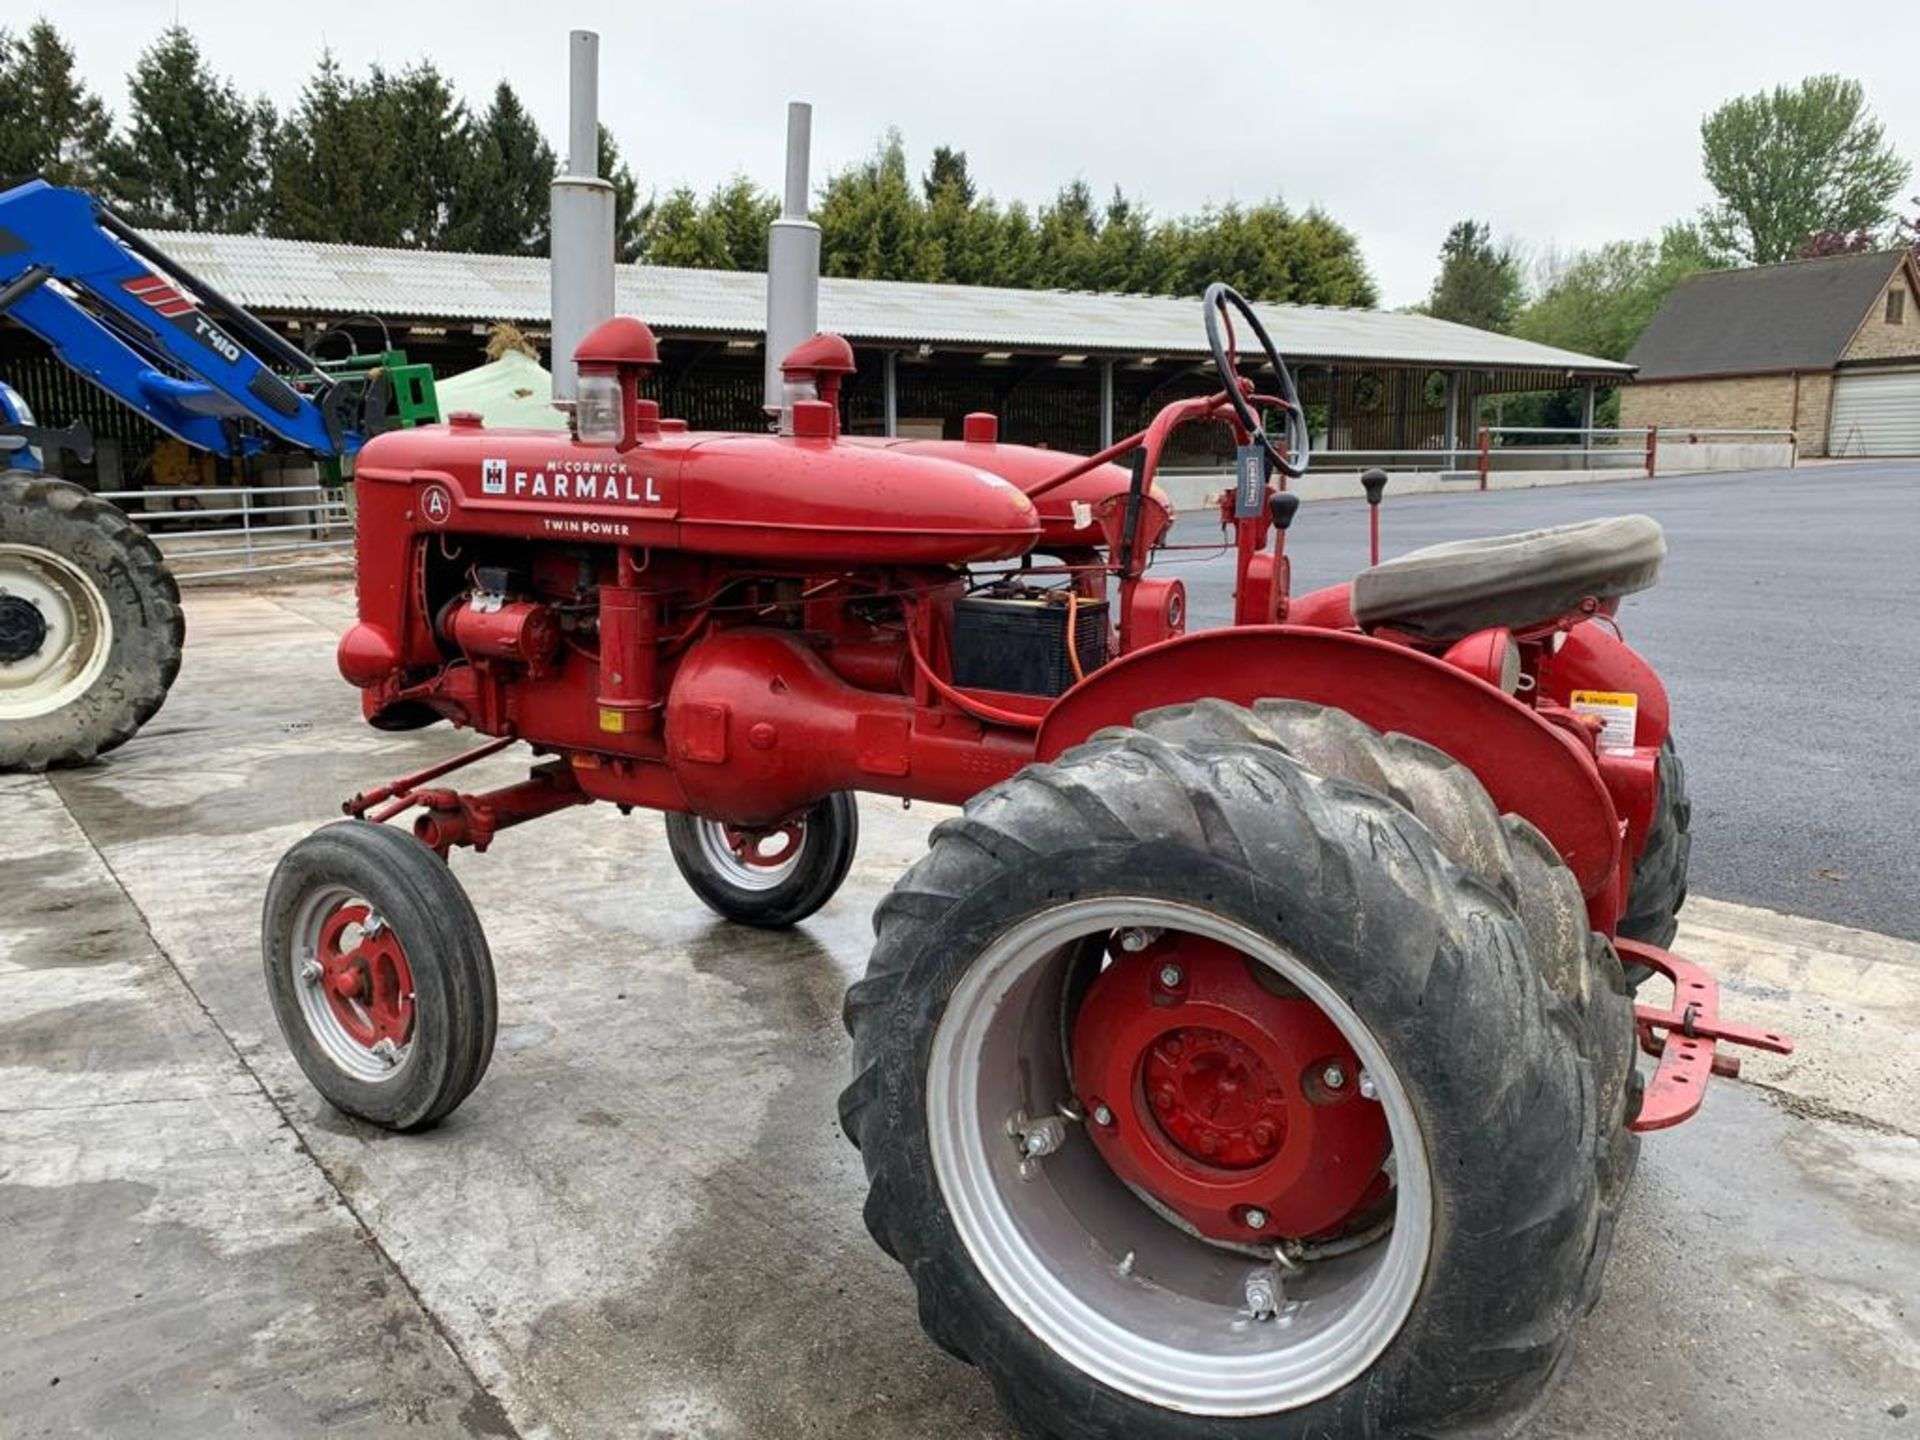 MCCORMICK FARMALL A TWIN POWER TWIN ENGINED VINTAGE TRACTOR *PLUS VAT* - Image 7 of 9